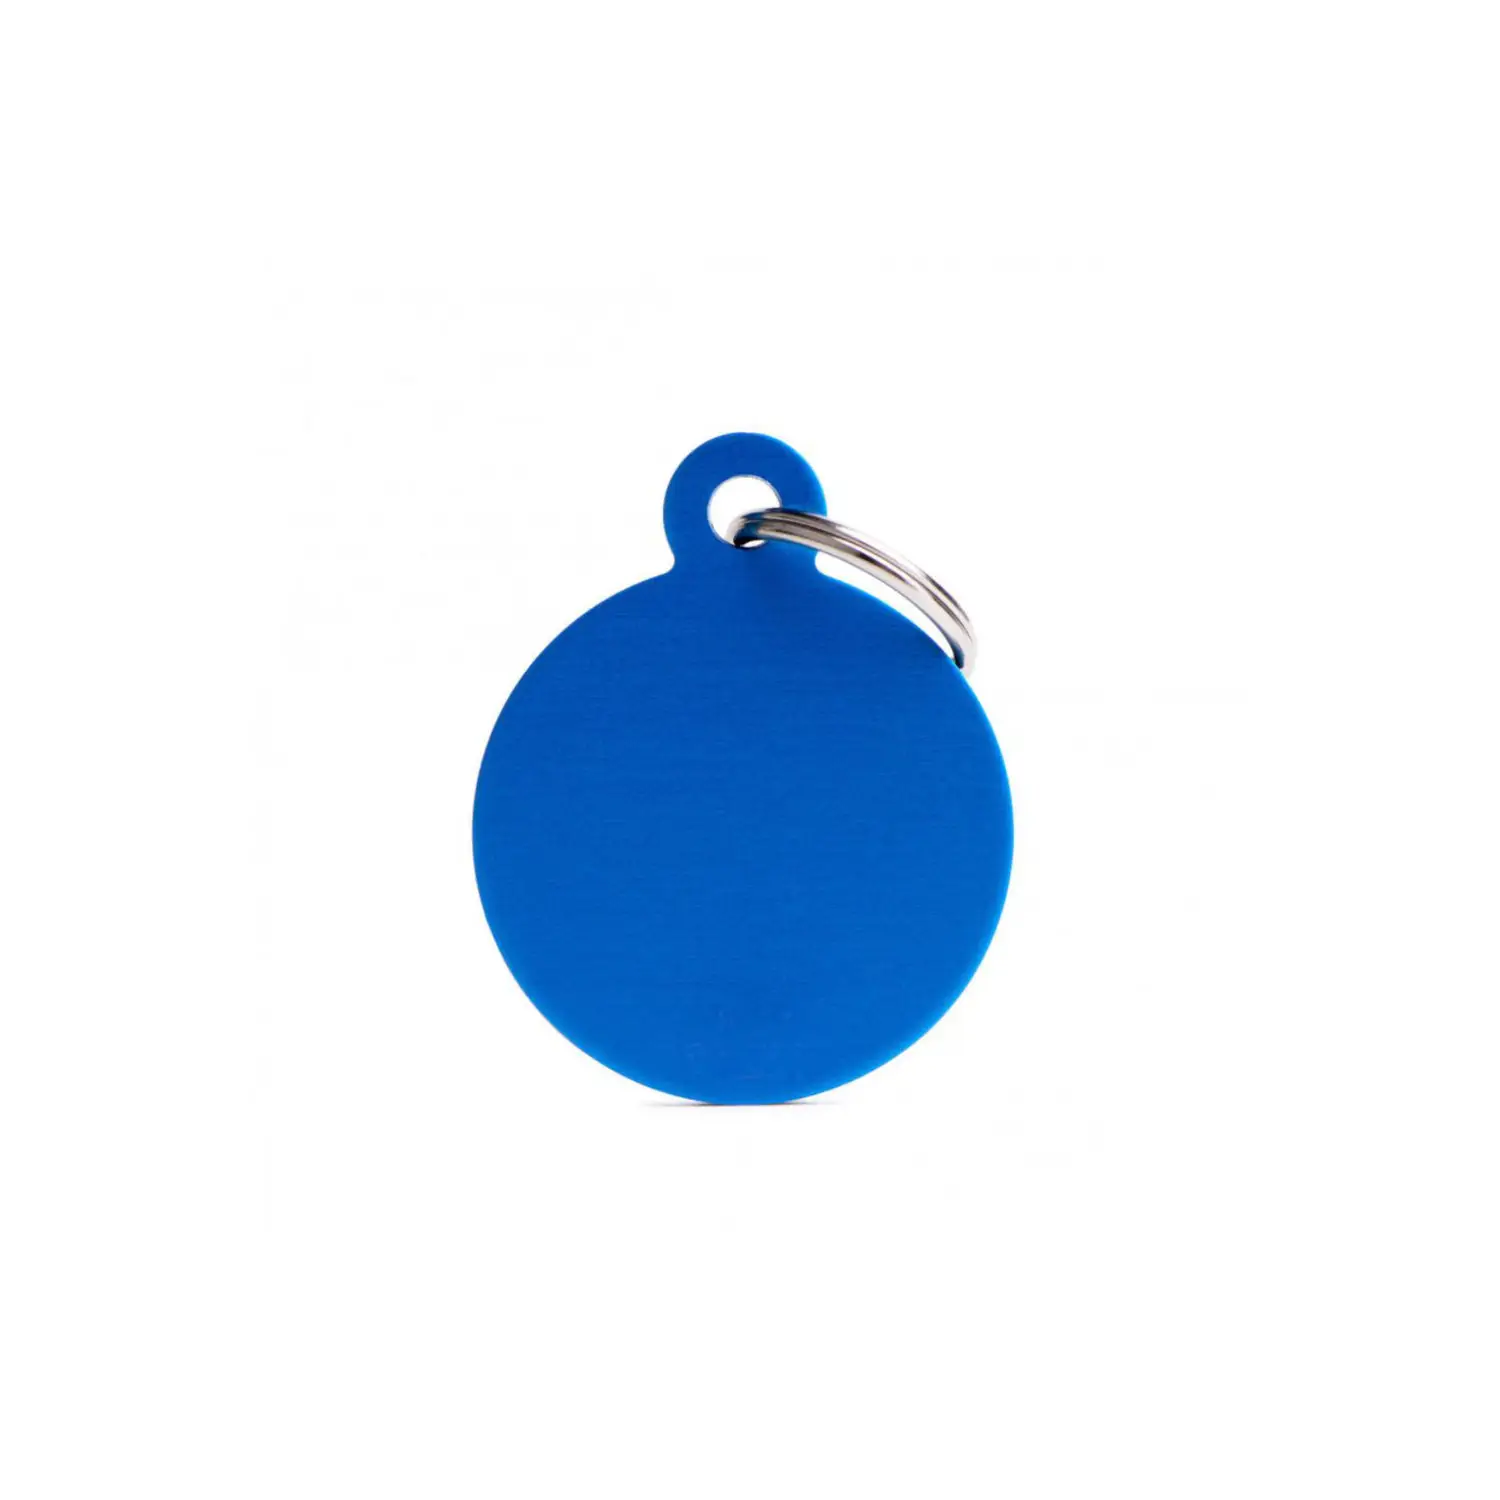 Wholesale Metal High Quality Pet ID Tags for Cat and Dog - Big Round Blue - Customizable Size and Colour custom pet tags